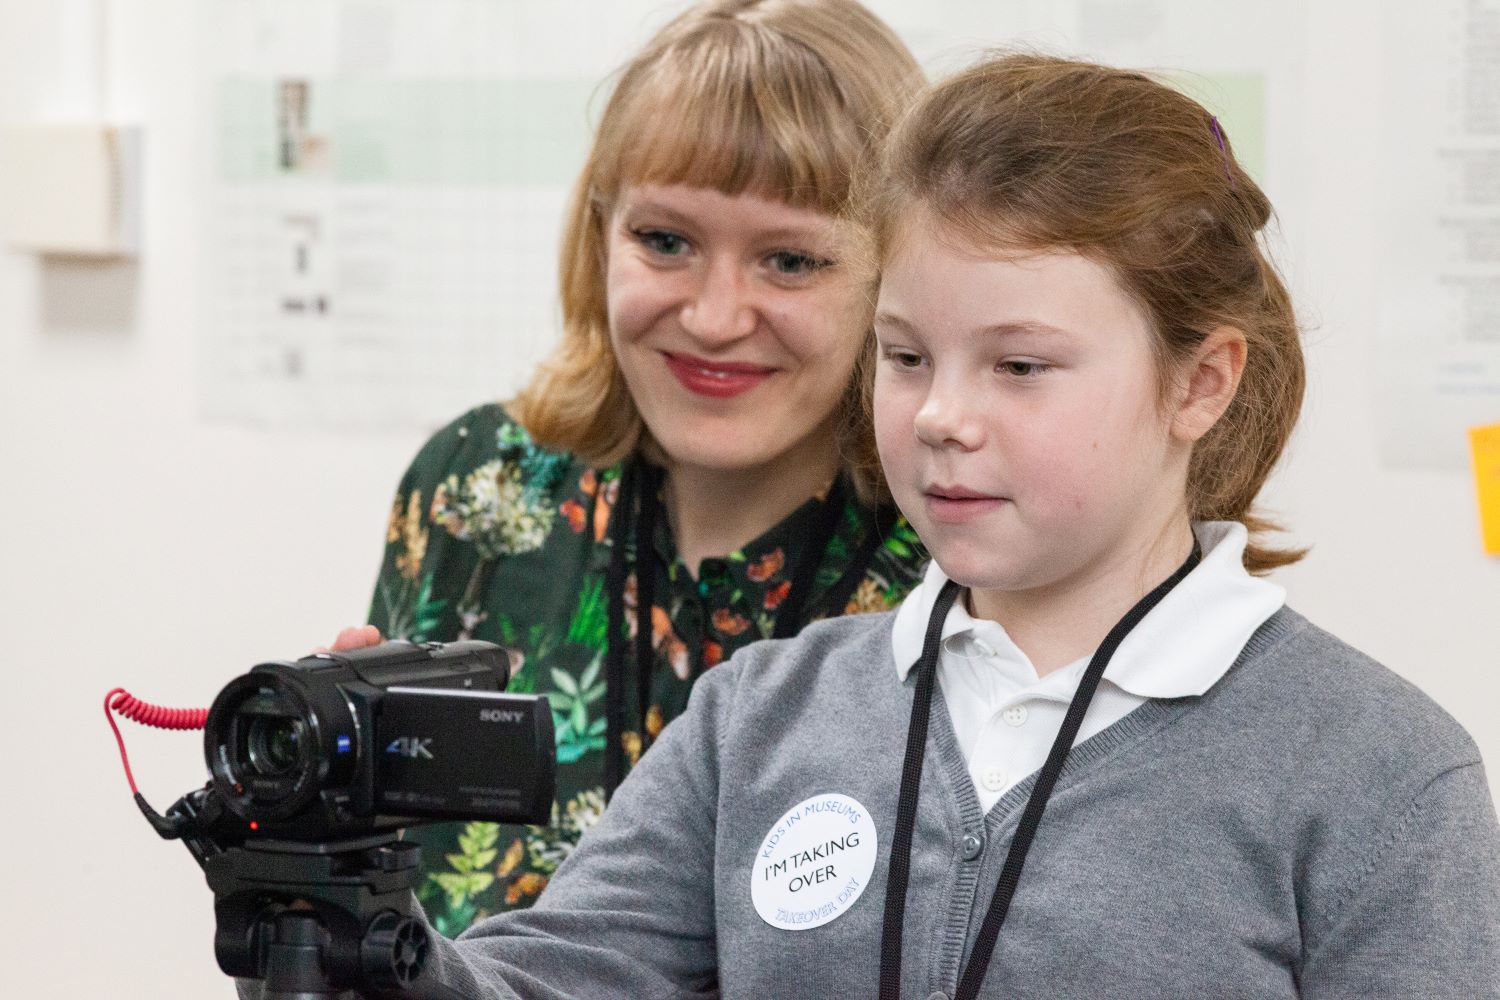 A young schoolgirl looks through a video camera next to a museum staff member.